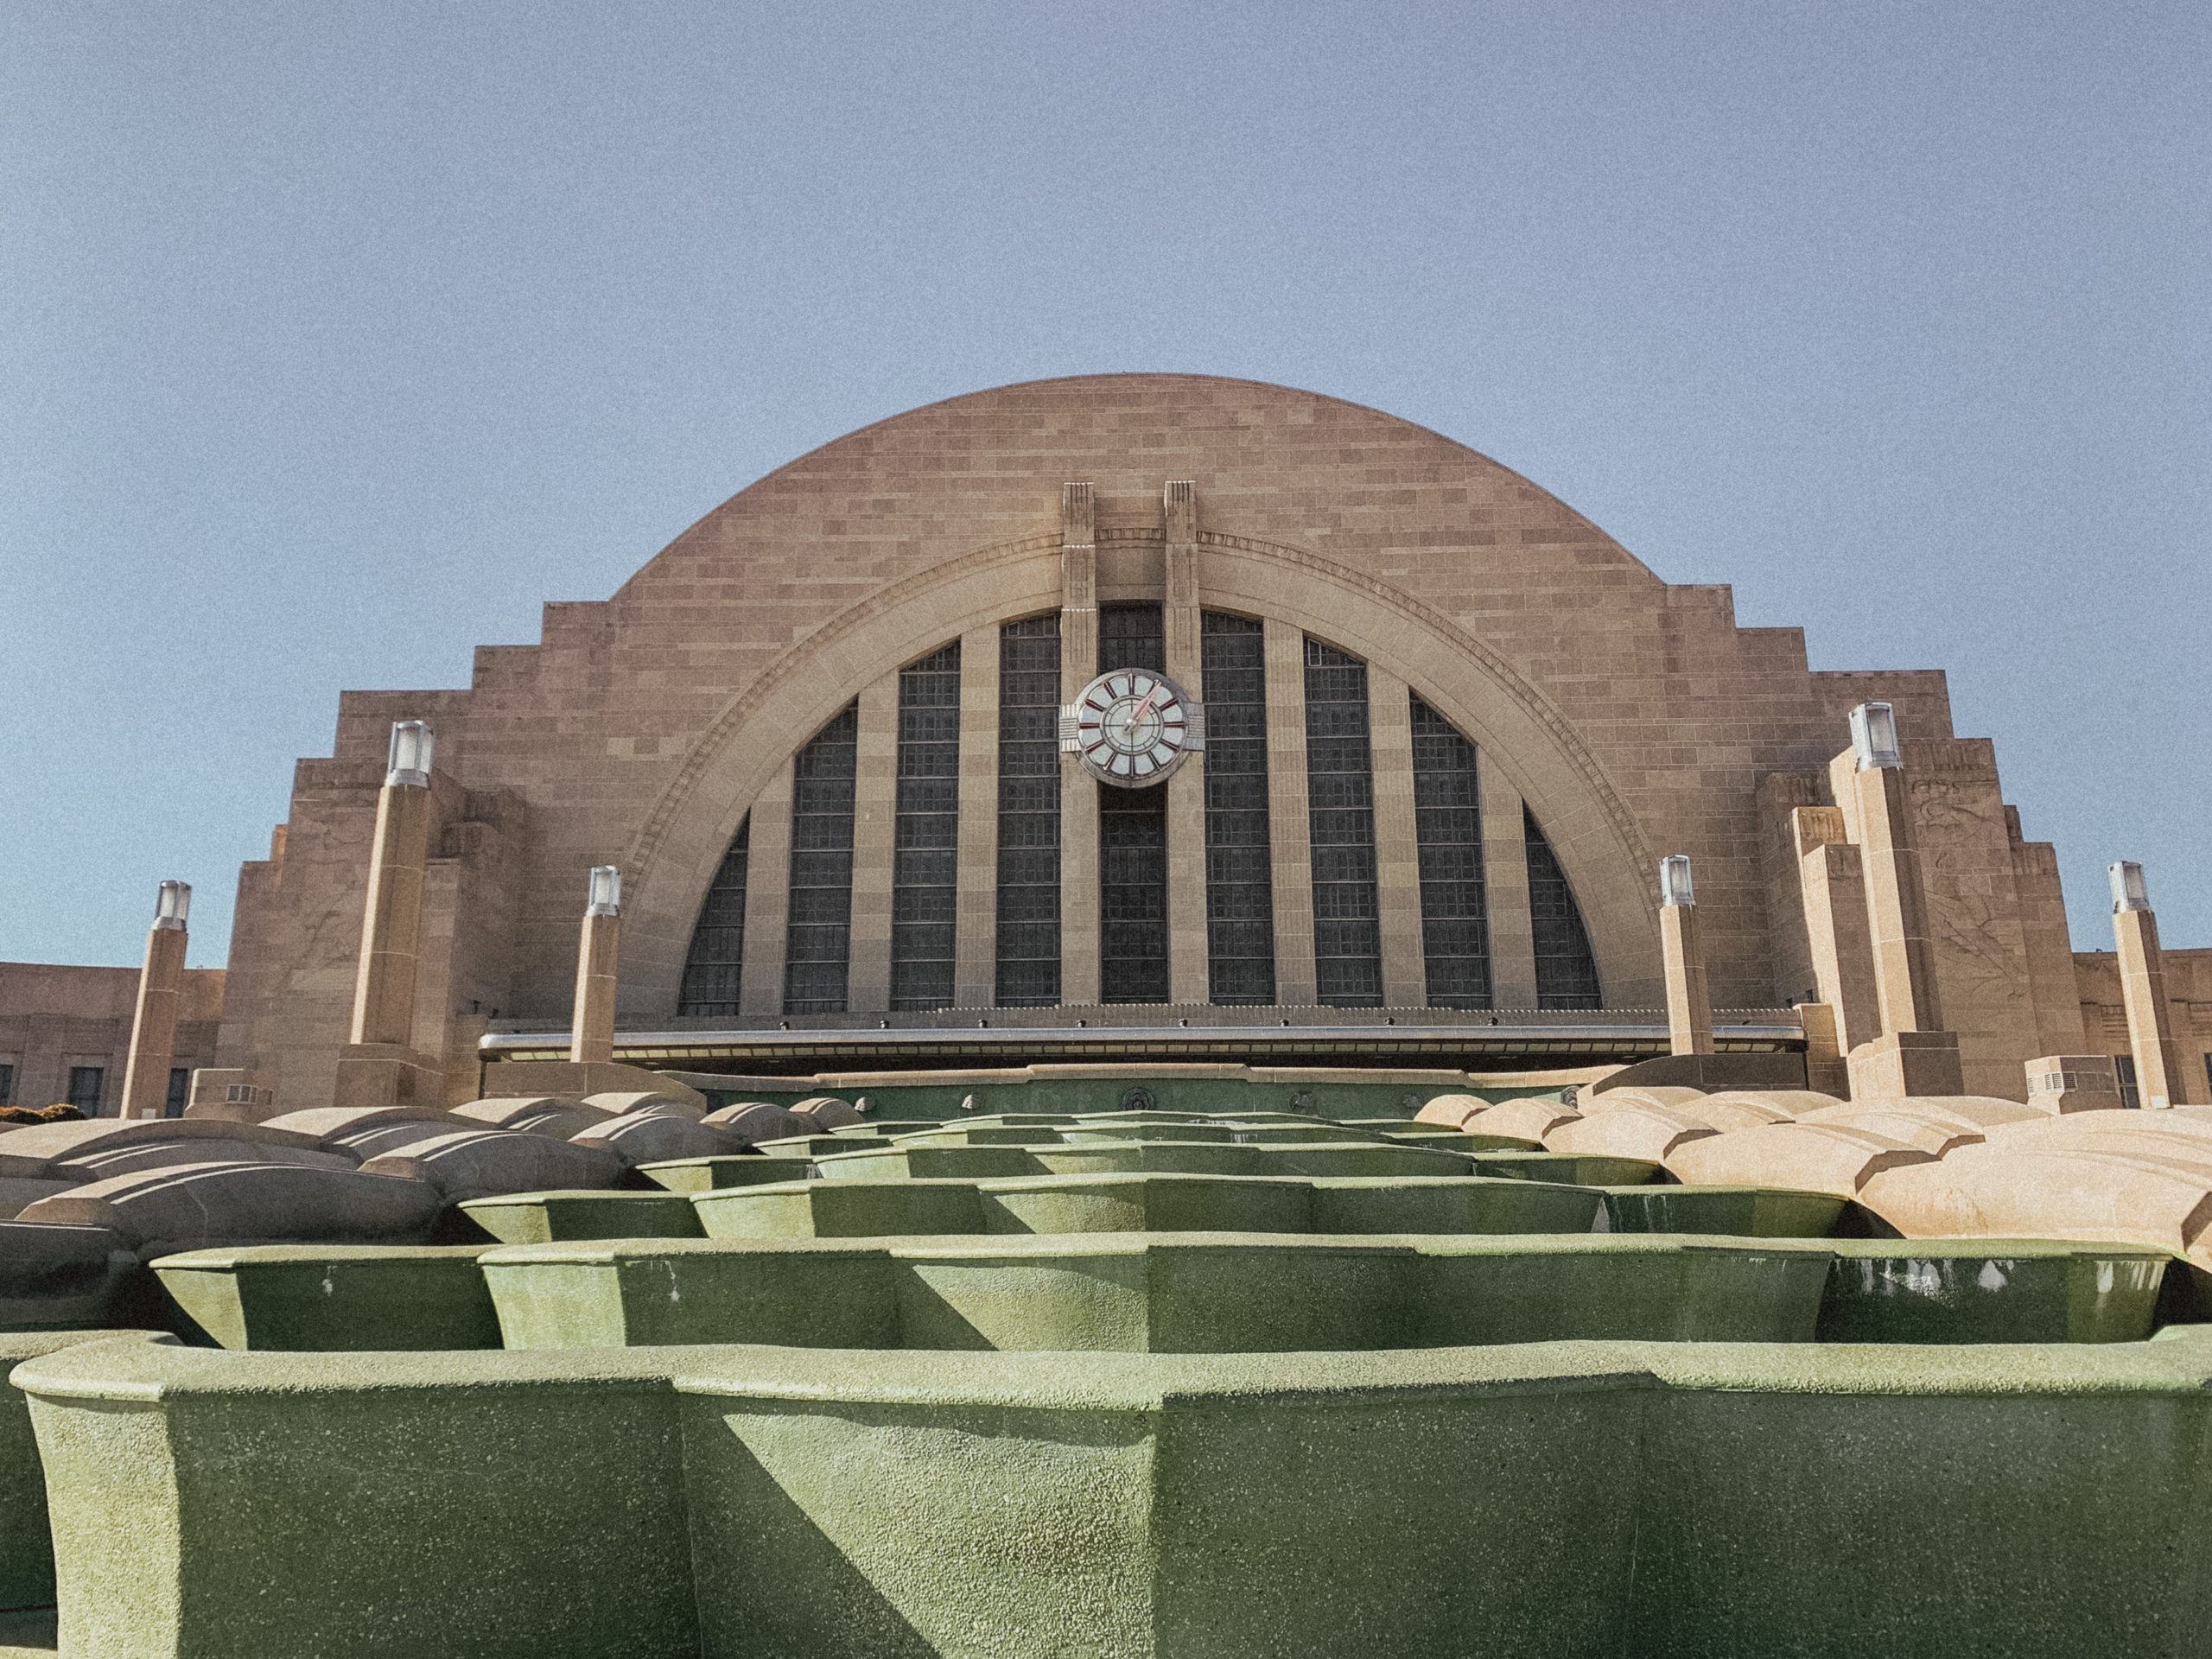 A view of Union Terminal in Cincinnati, Ohio. Picture taken from a view of the terminal's emerald green terrazzo fountain.